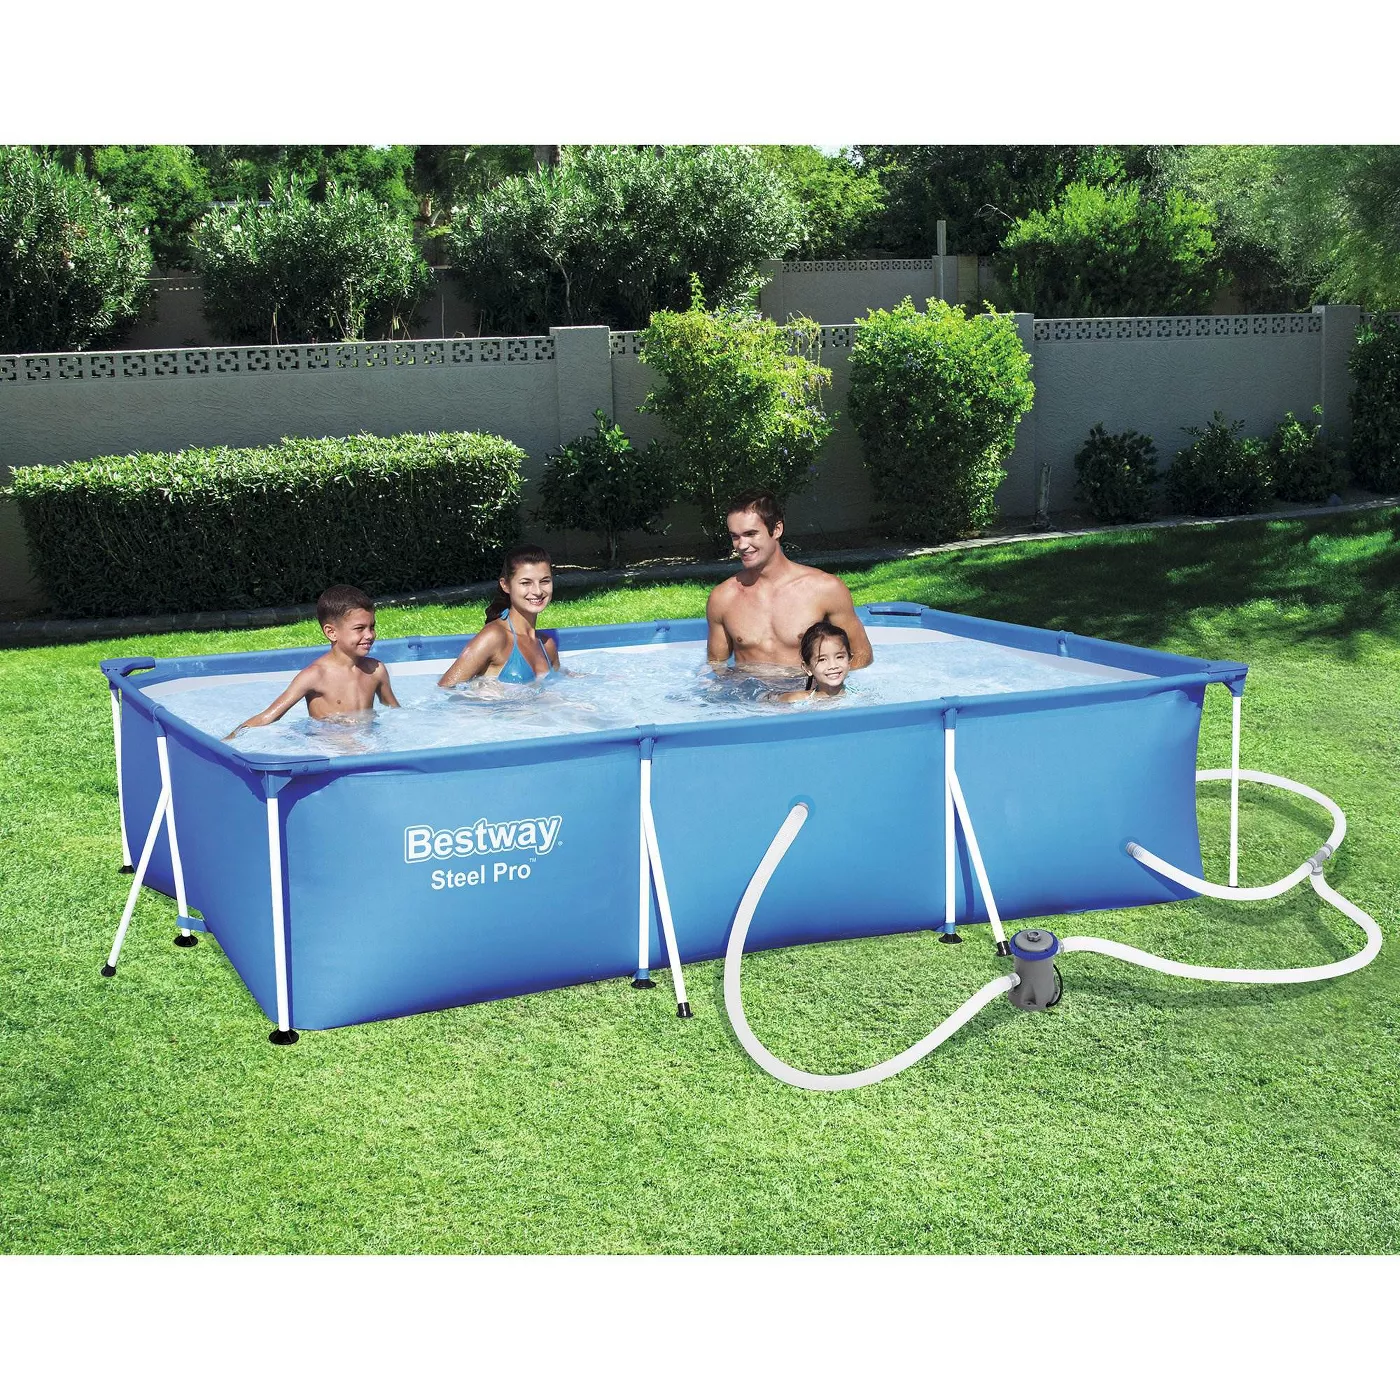 Bestway Steel Pro 9.8ft x 5.6ft x 26in Above Ground Swimming Pool Set with Pump - image 2 of 6